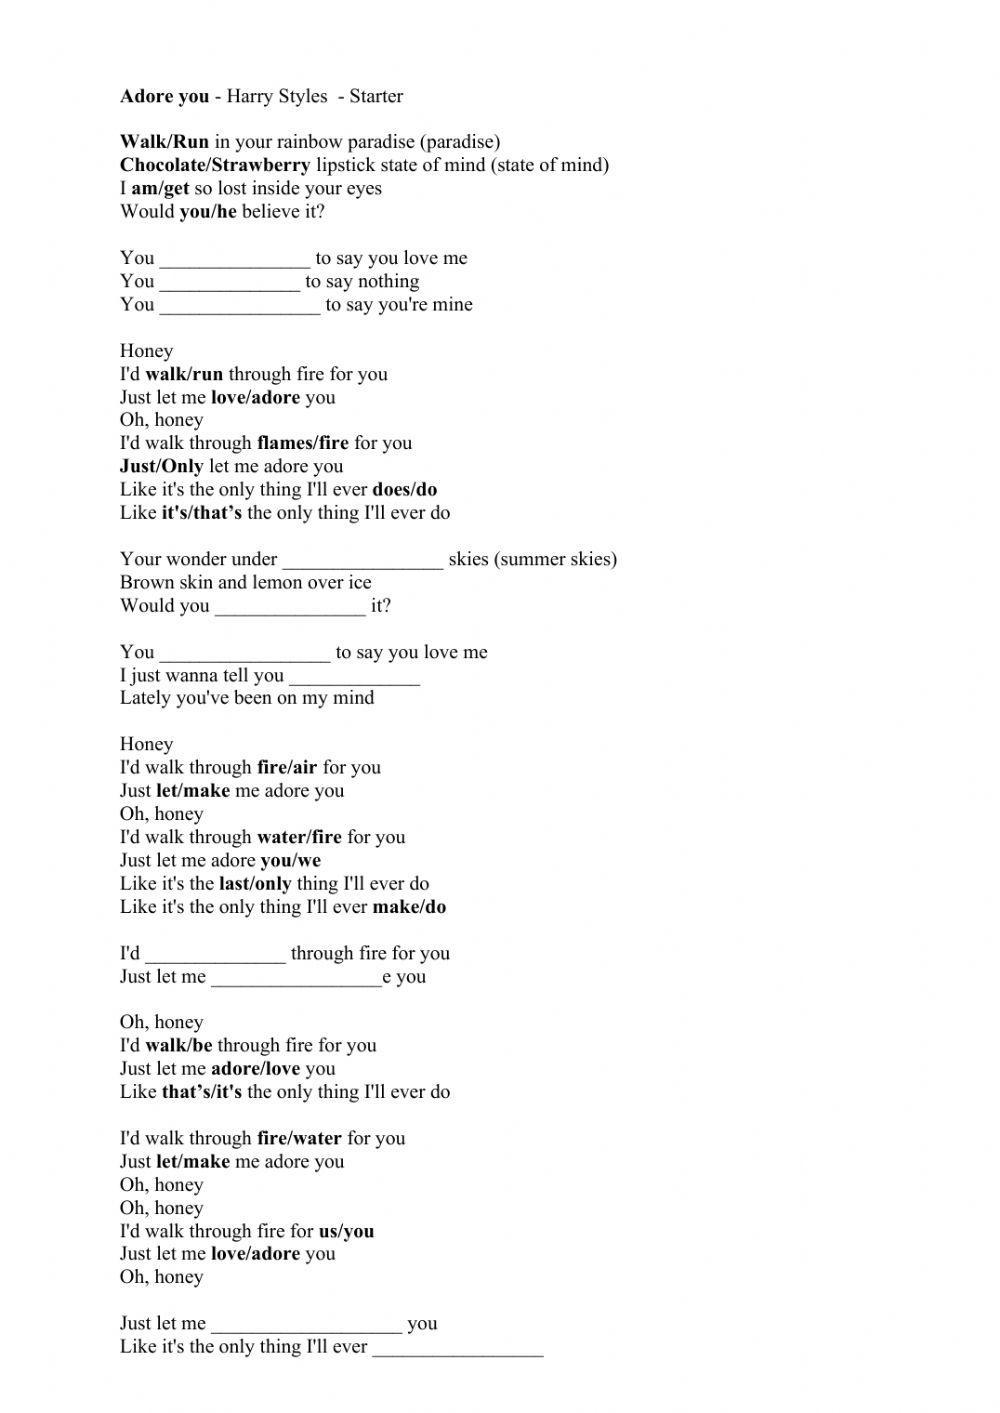 Conner - adore you harry styles [Sped Up] MP3 Download & Lyrics